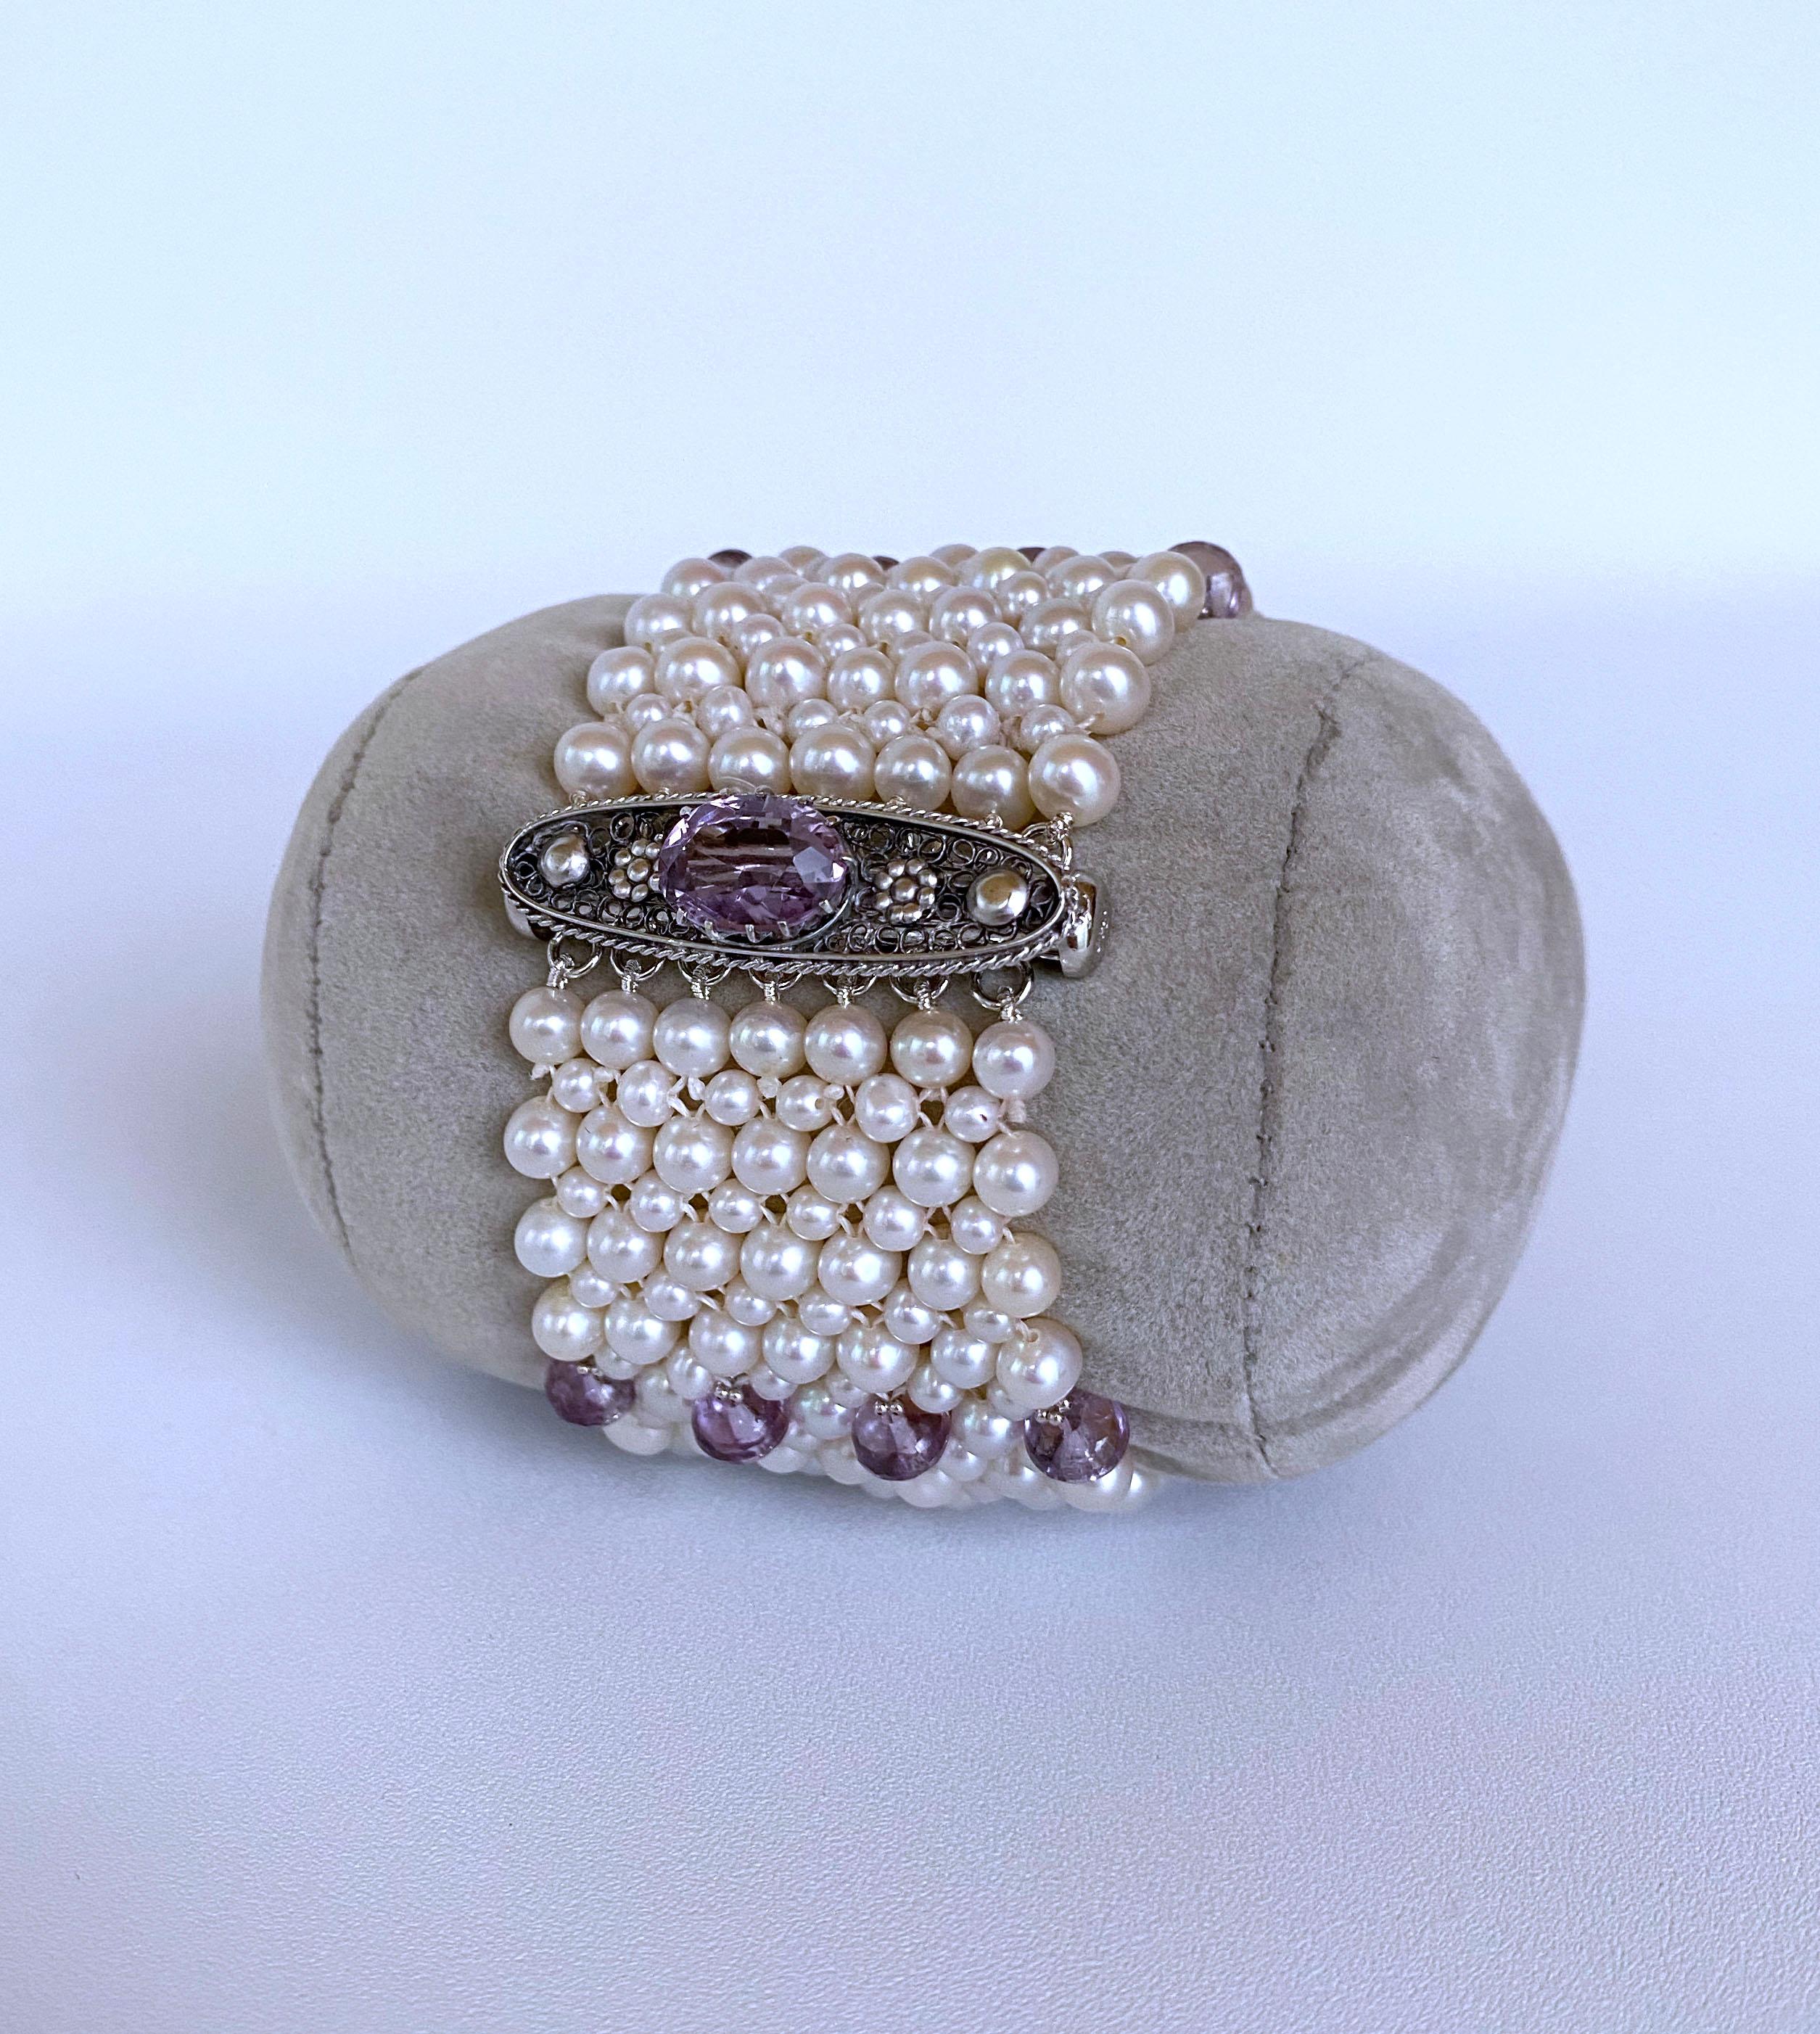 Marina J. Amethyst and Pearl Bracelet with Vintage Centerpiece Clasp and Rhodium For Sale 2